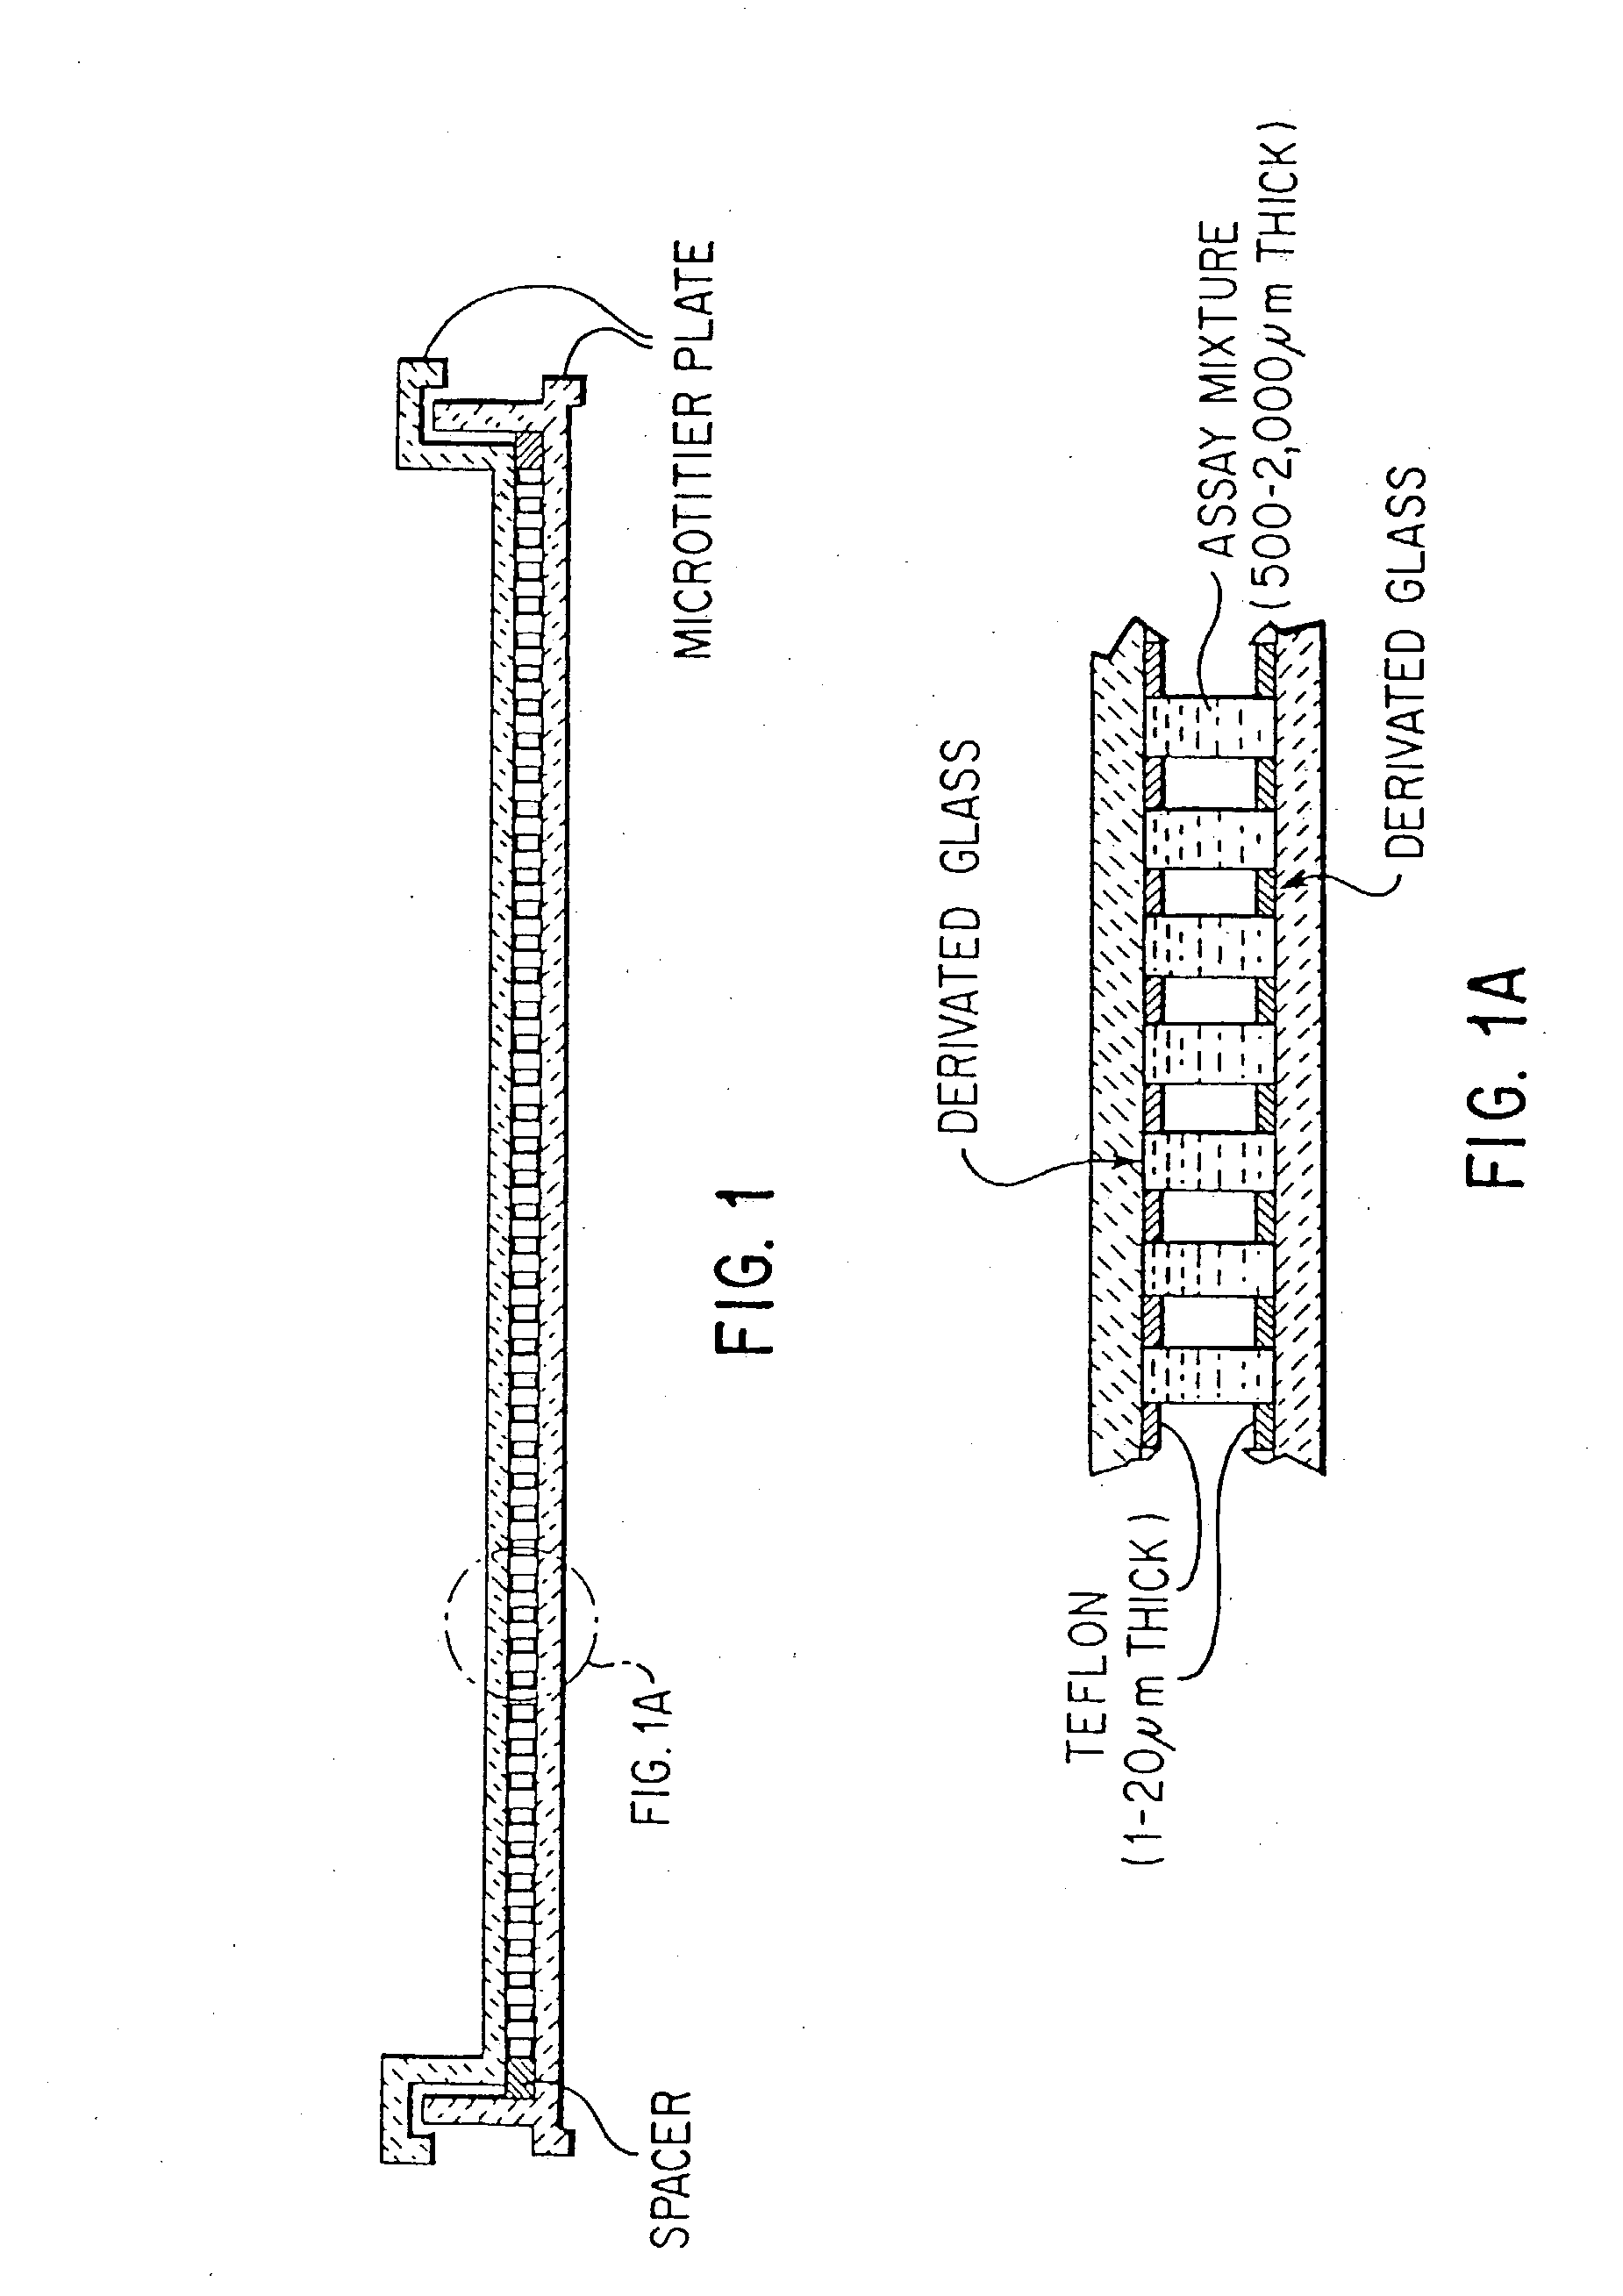 Virtual wells for use in high throughput screening assays